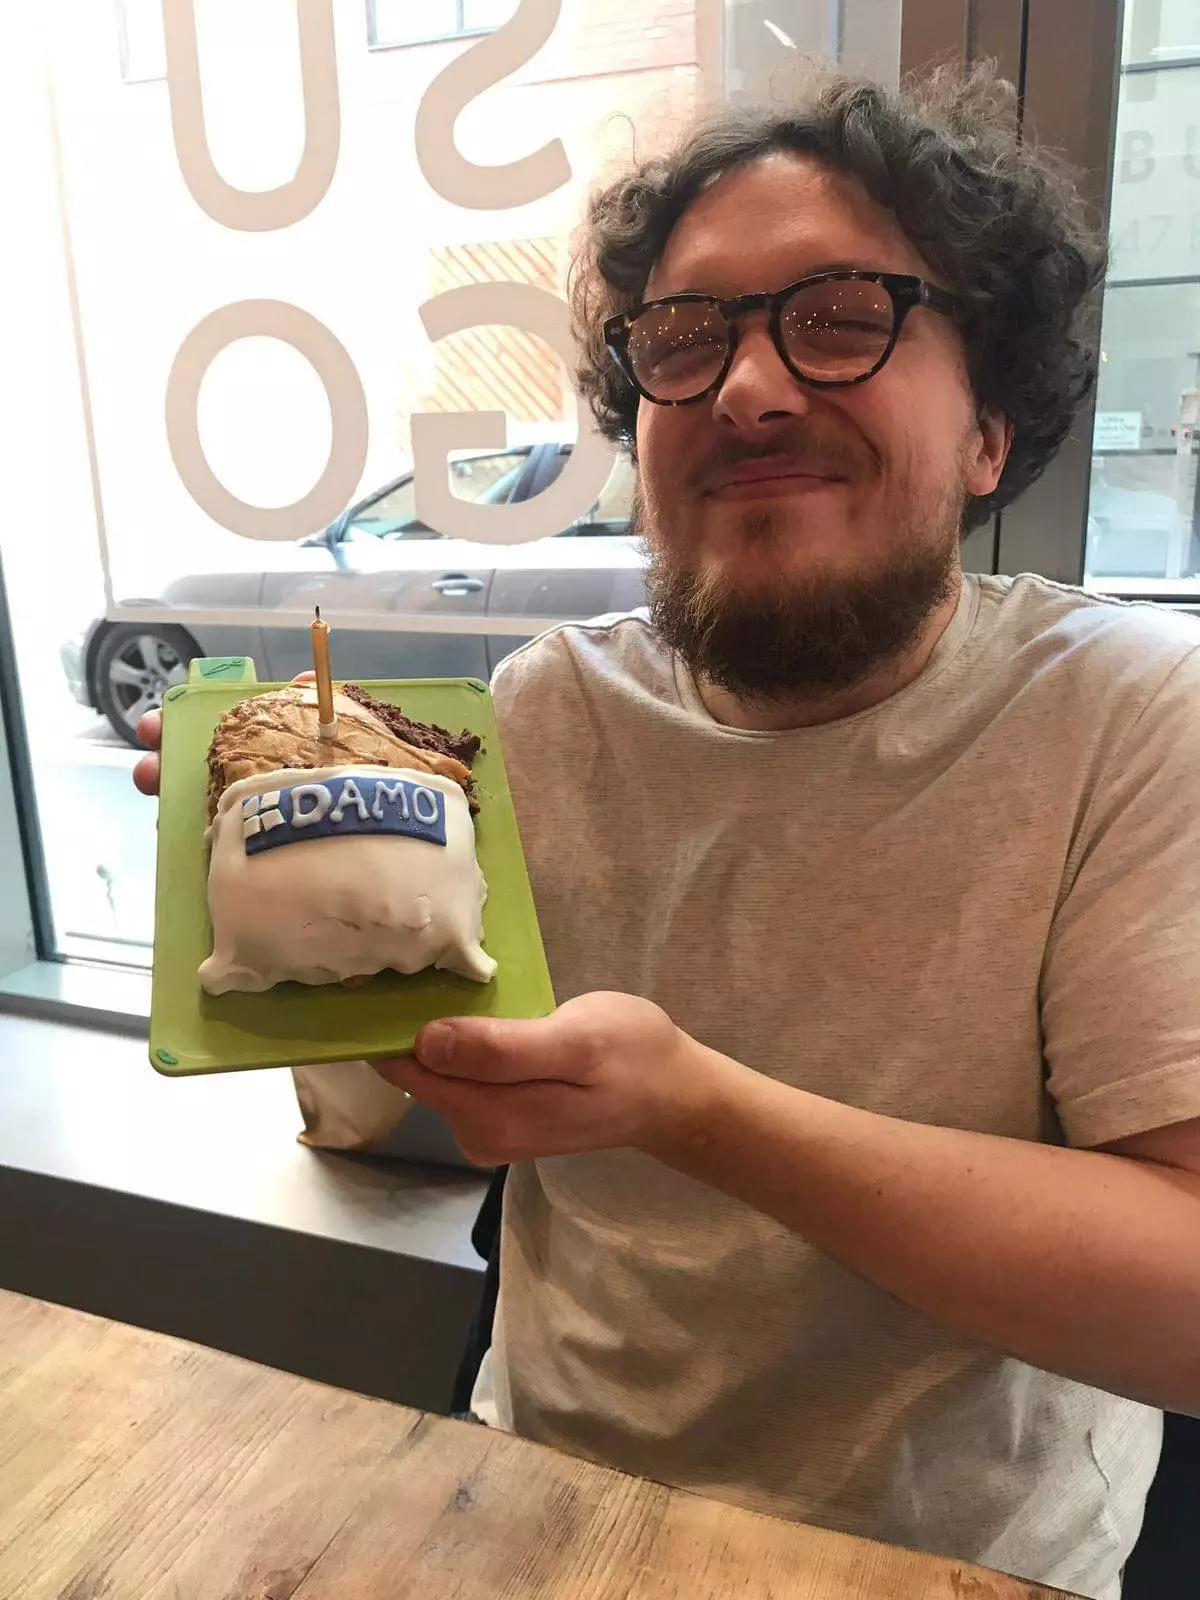 Our Damo clearly made up with his cake.